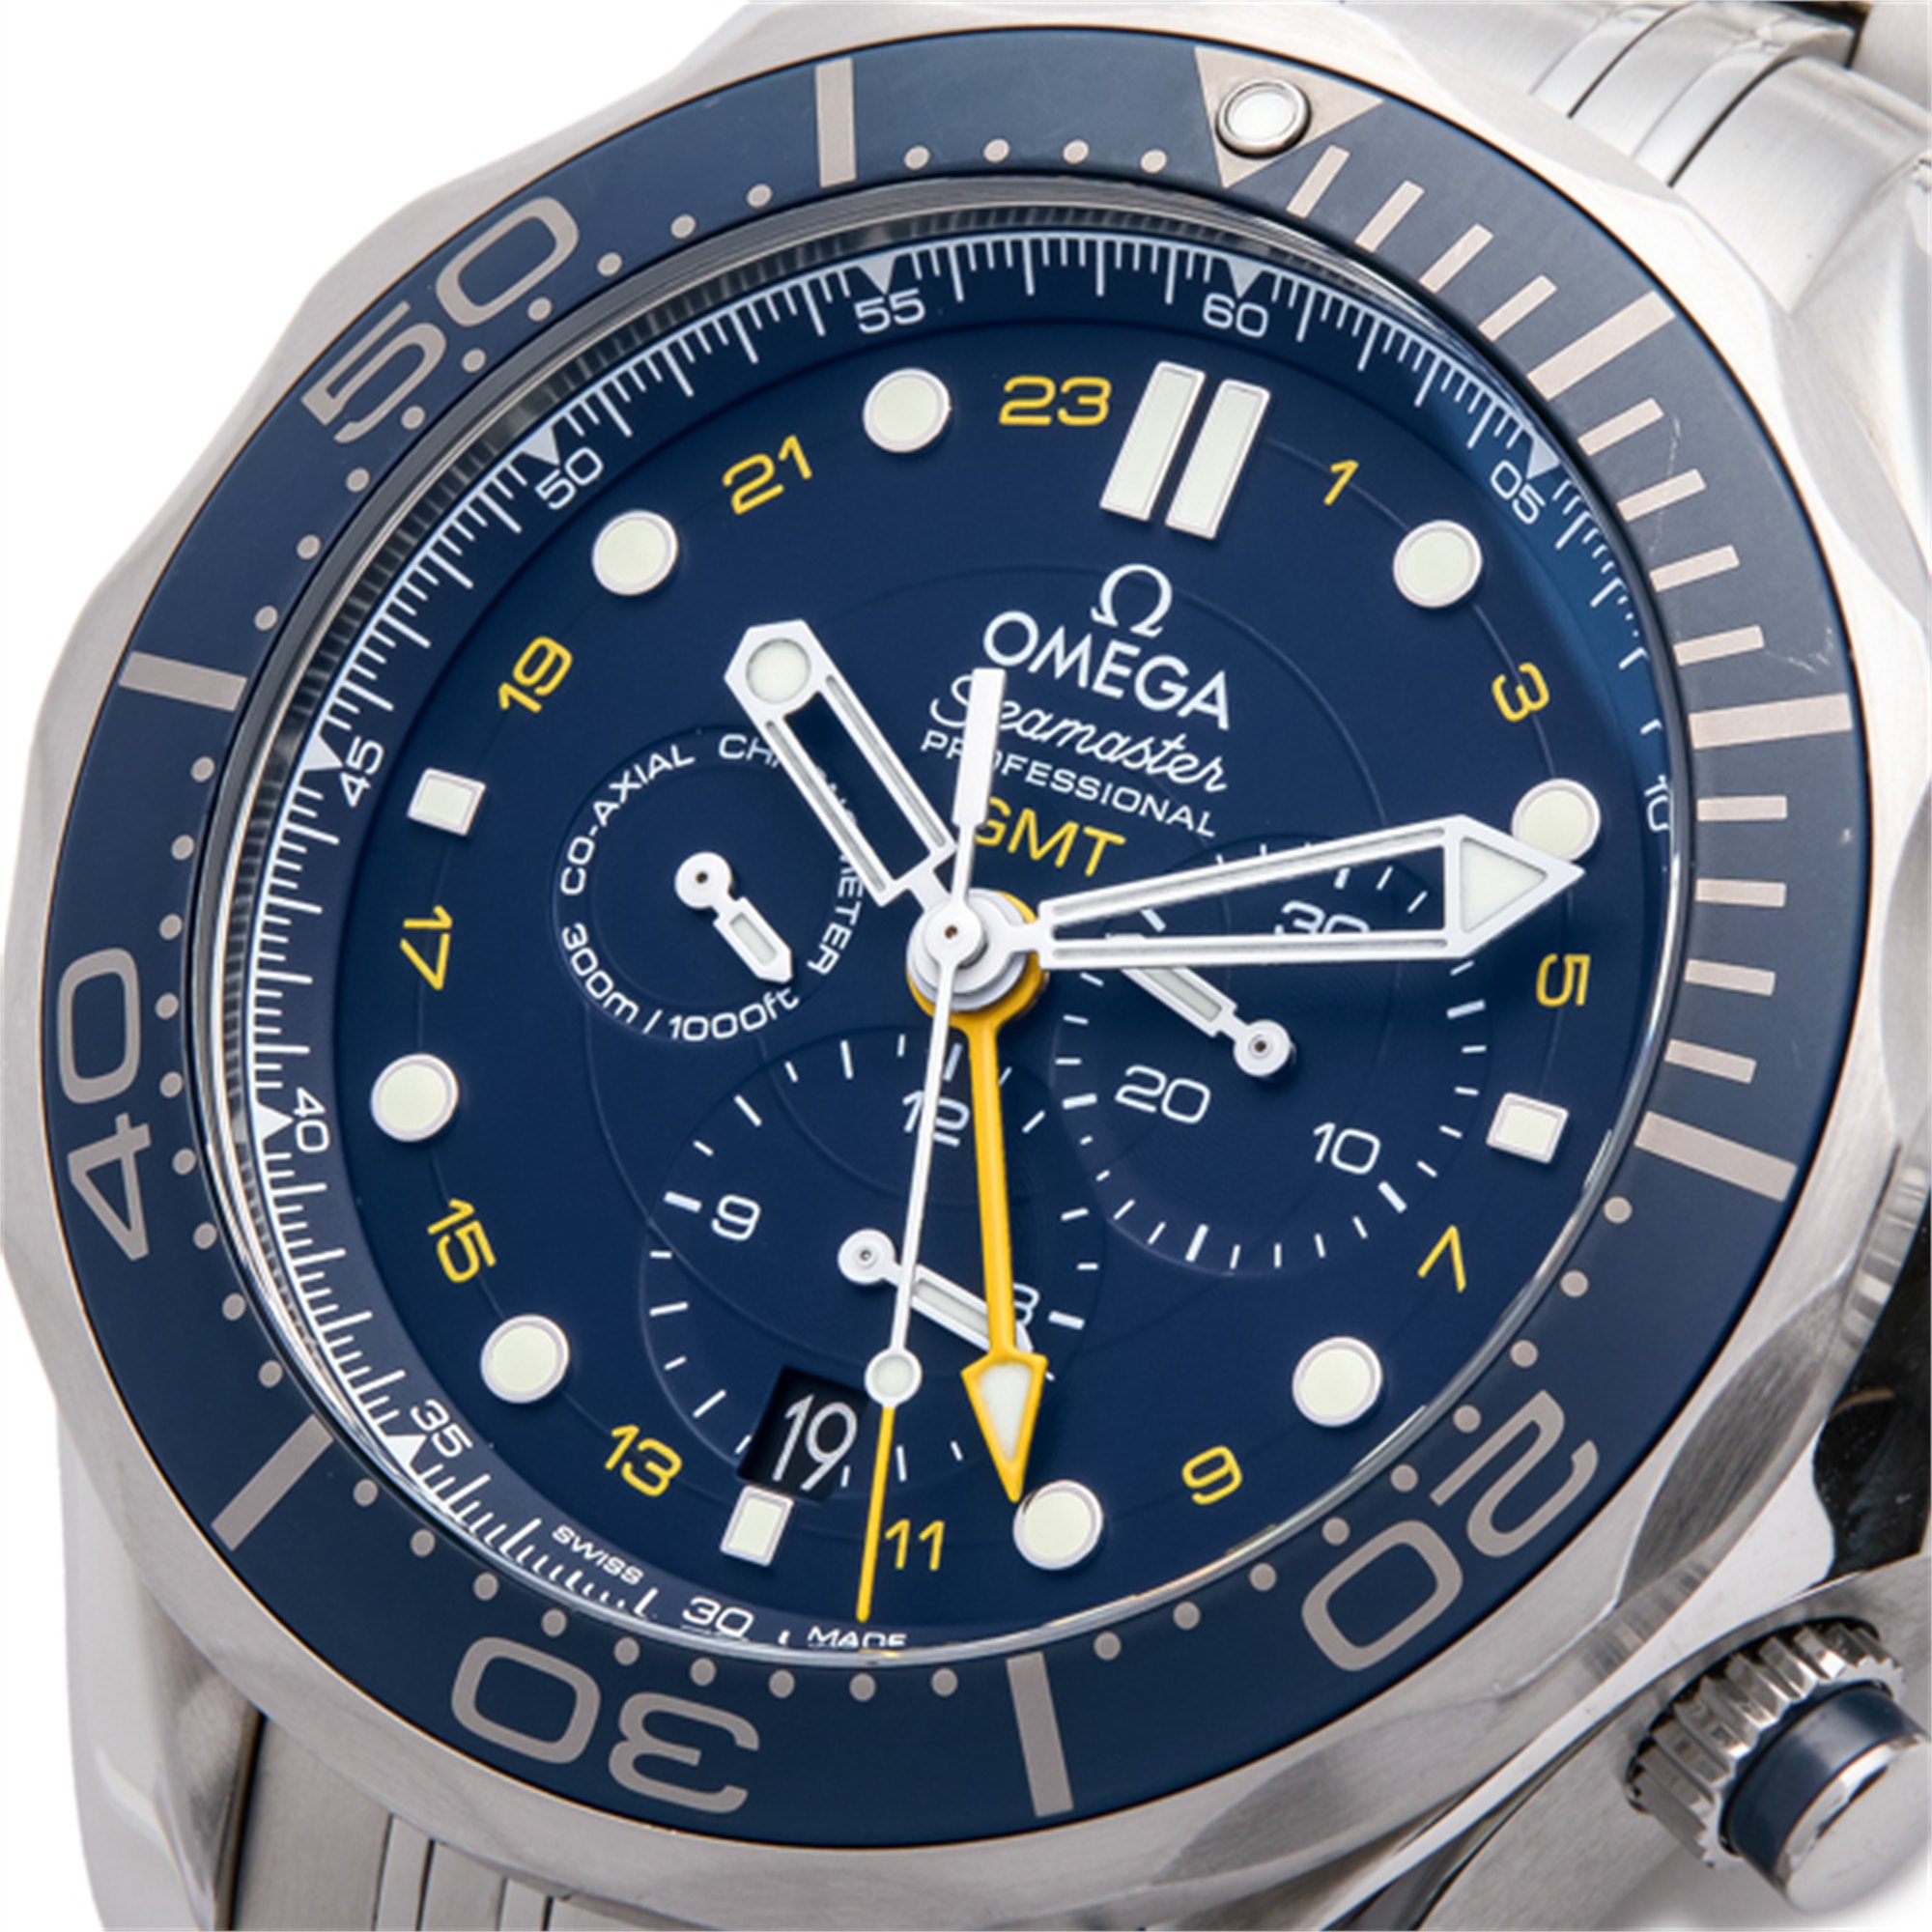 Omega Seamaster Chronograph GMT Roestvrij Staal 212.30.44.52.03.001